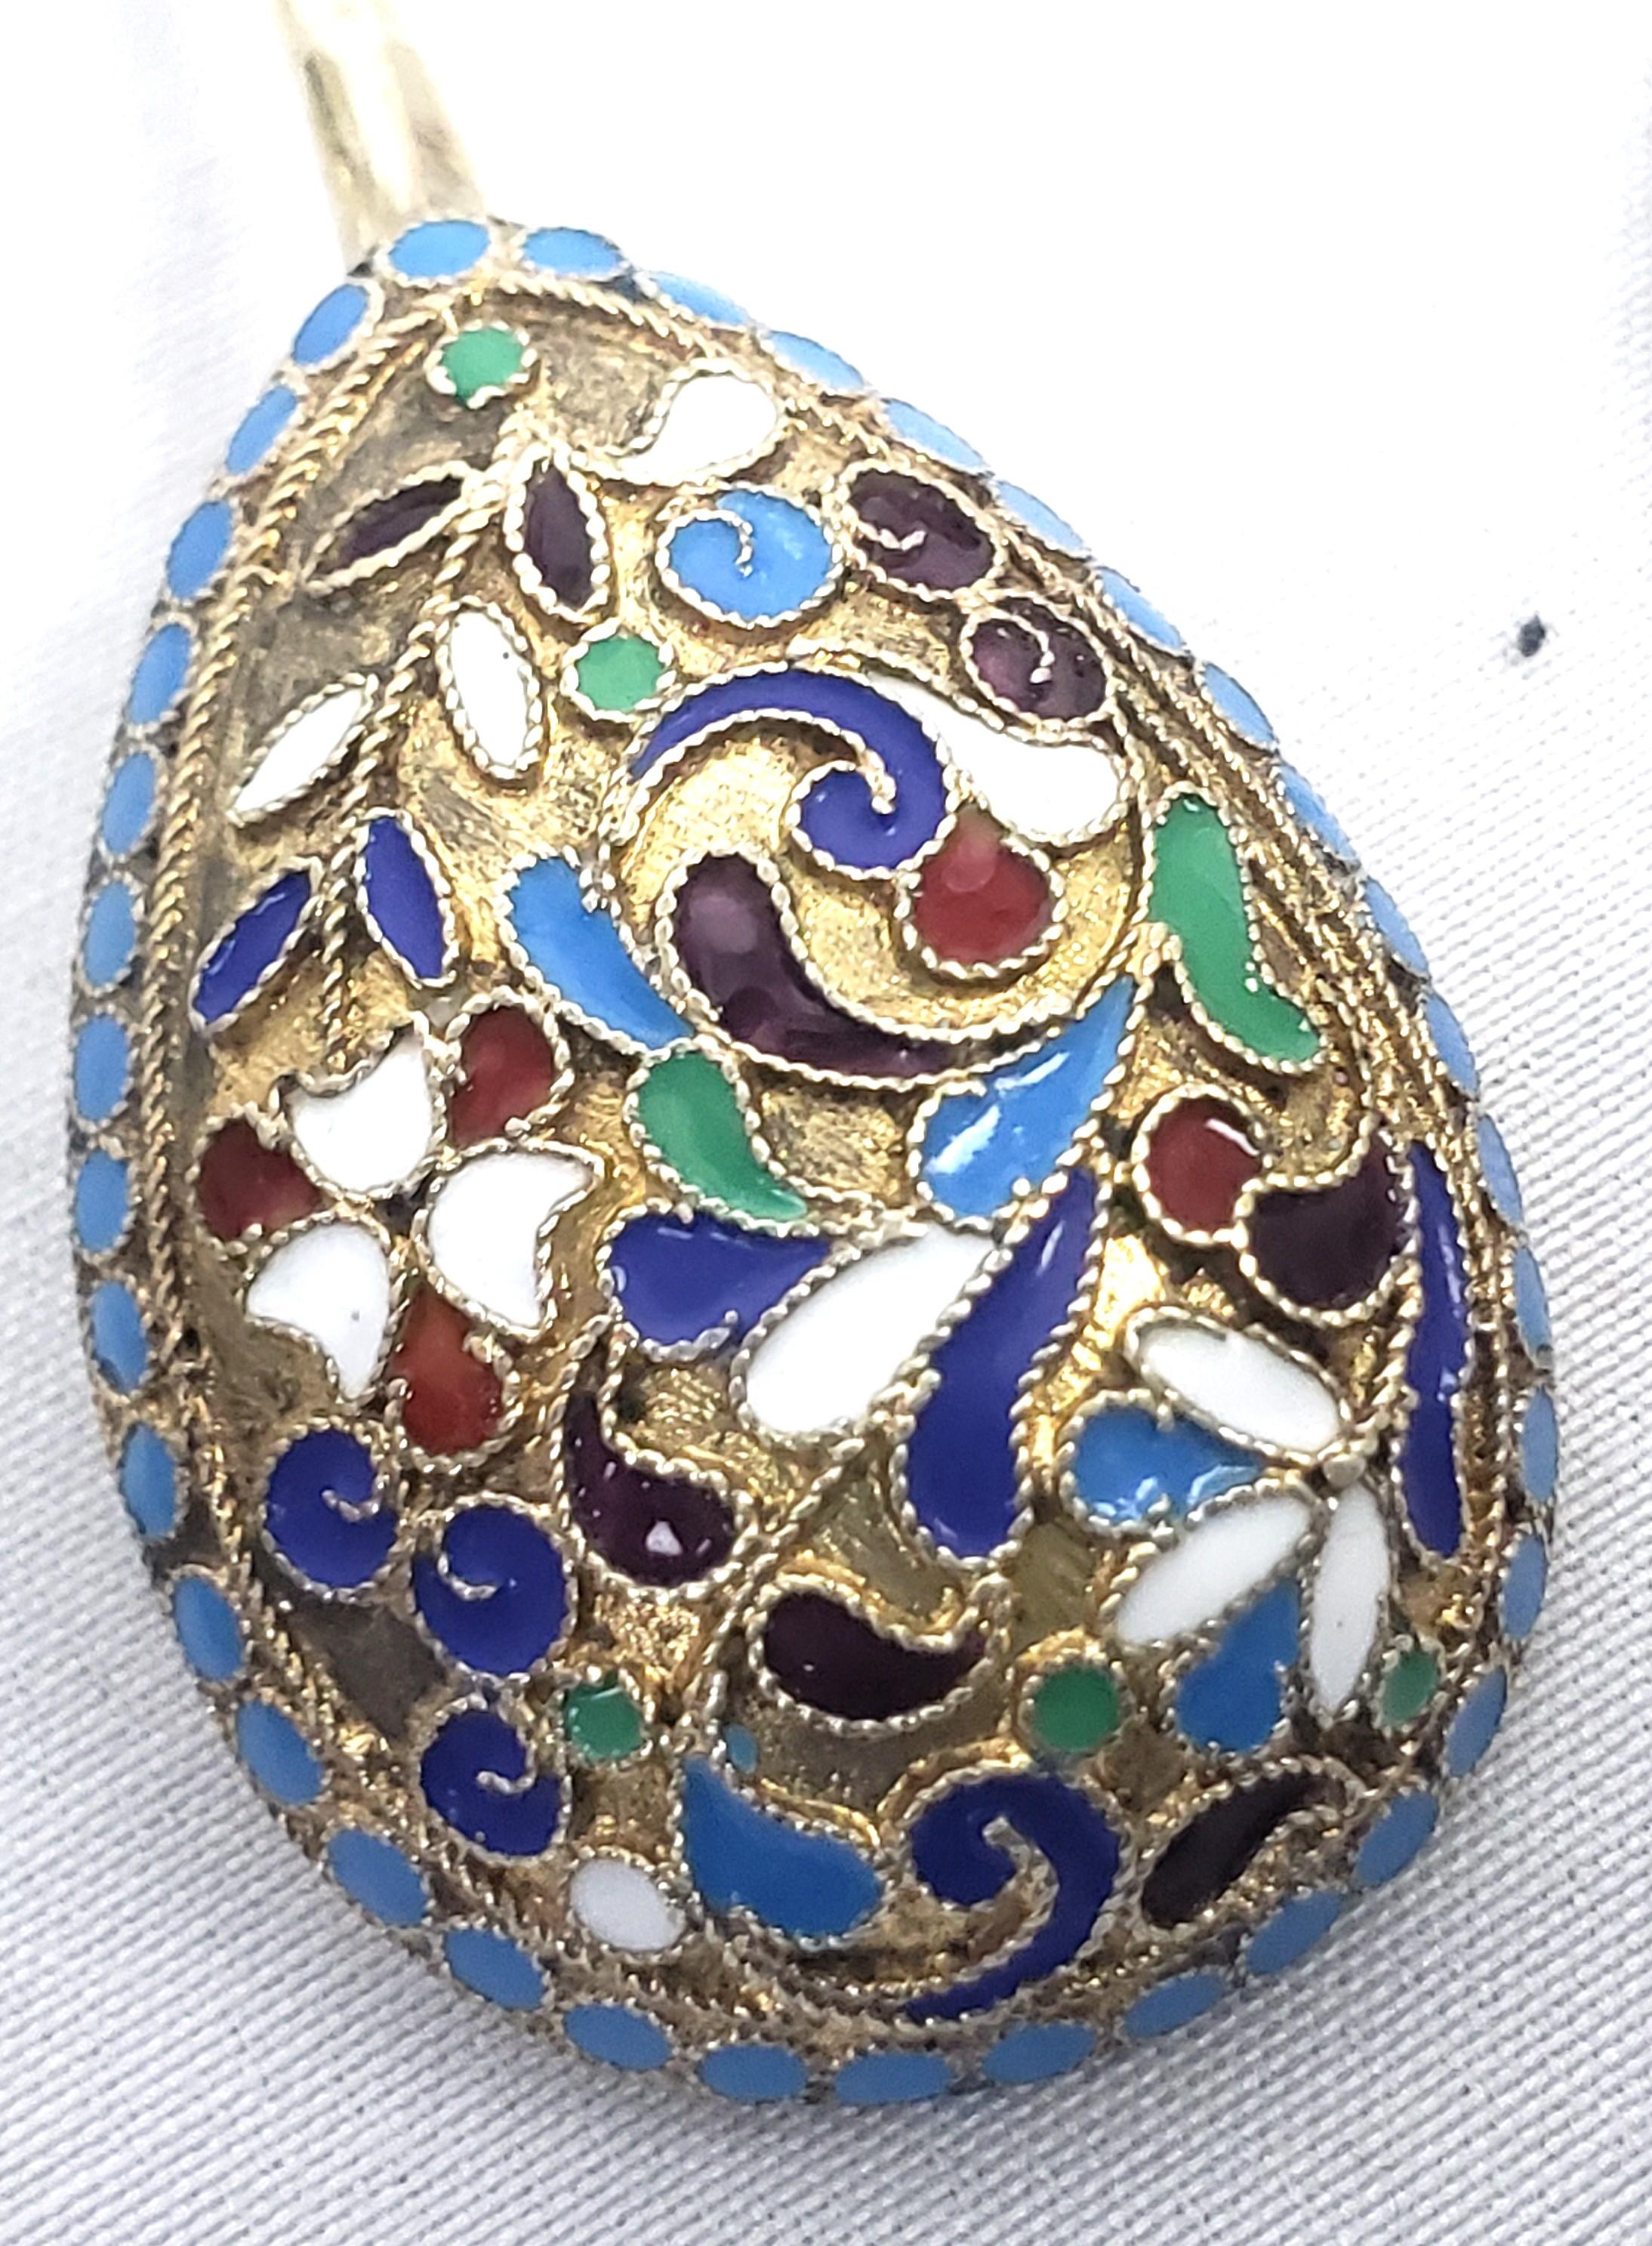 Antique Russian Silver & Enamel Spoon Set with Ornate Floral Motif For Sale 4